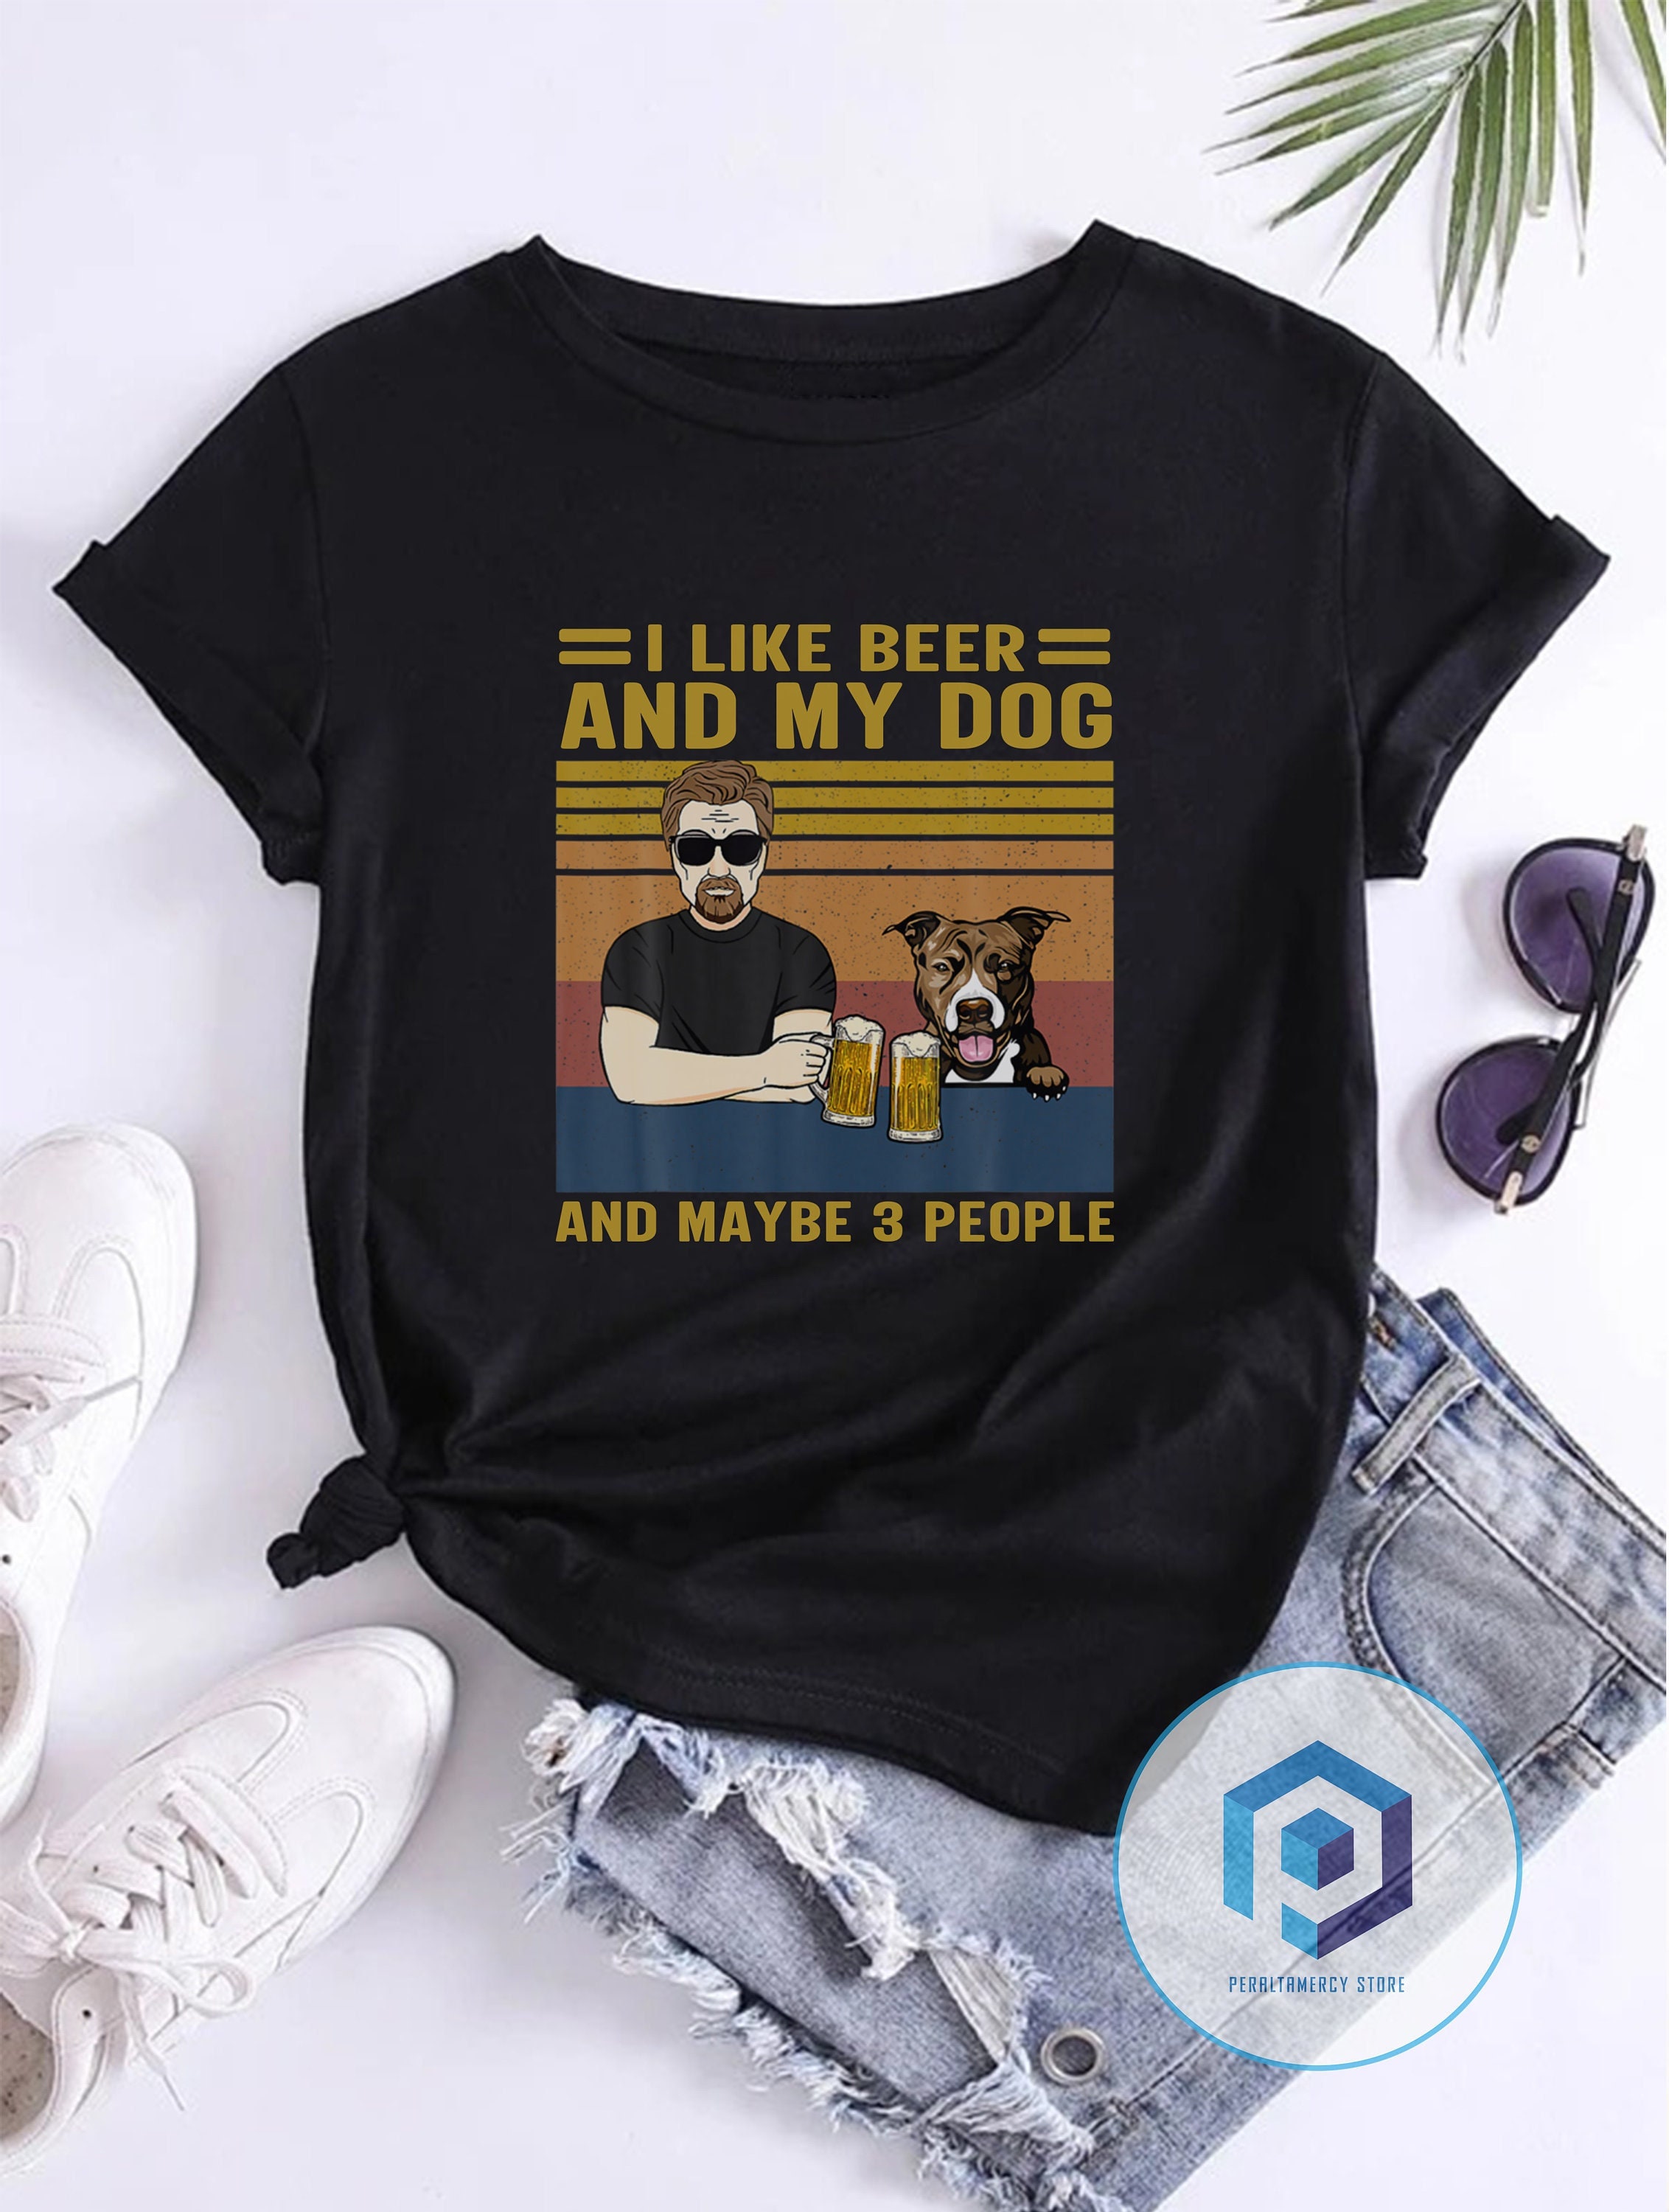 C I Like Beer and My Dogs - Dog Personalized Custom Unisex T-Shirt, Hoodie, Sweatshirt - Gift for Pet Owners, Pet Lovers - Basic Tee / S / White 